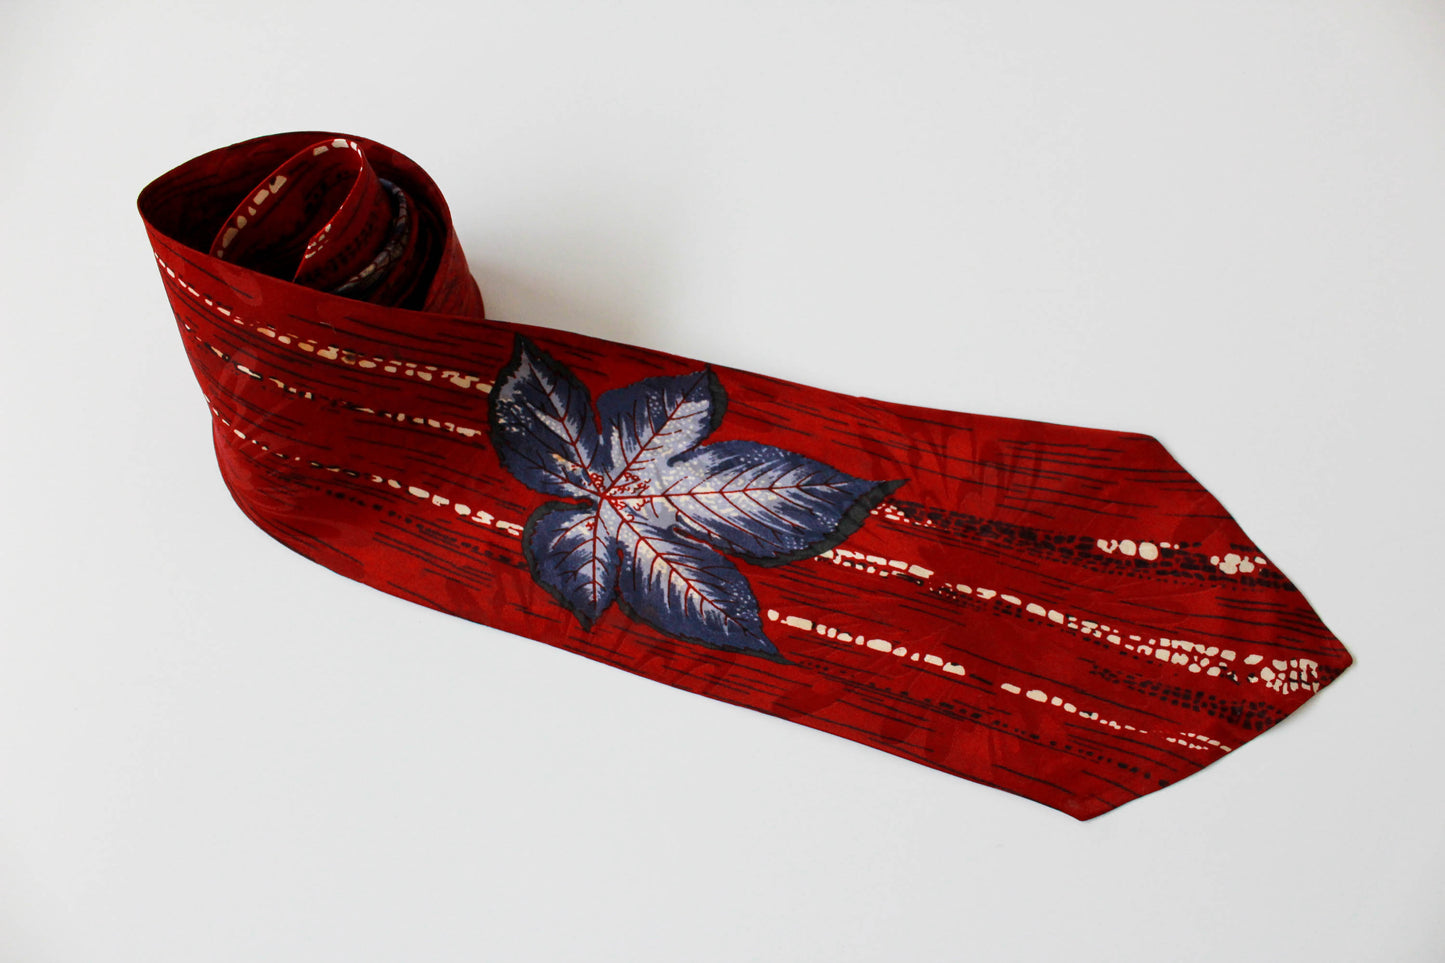 1940s Red Rayon Necktie with Blue Flower Print